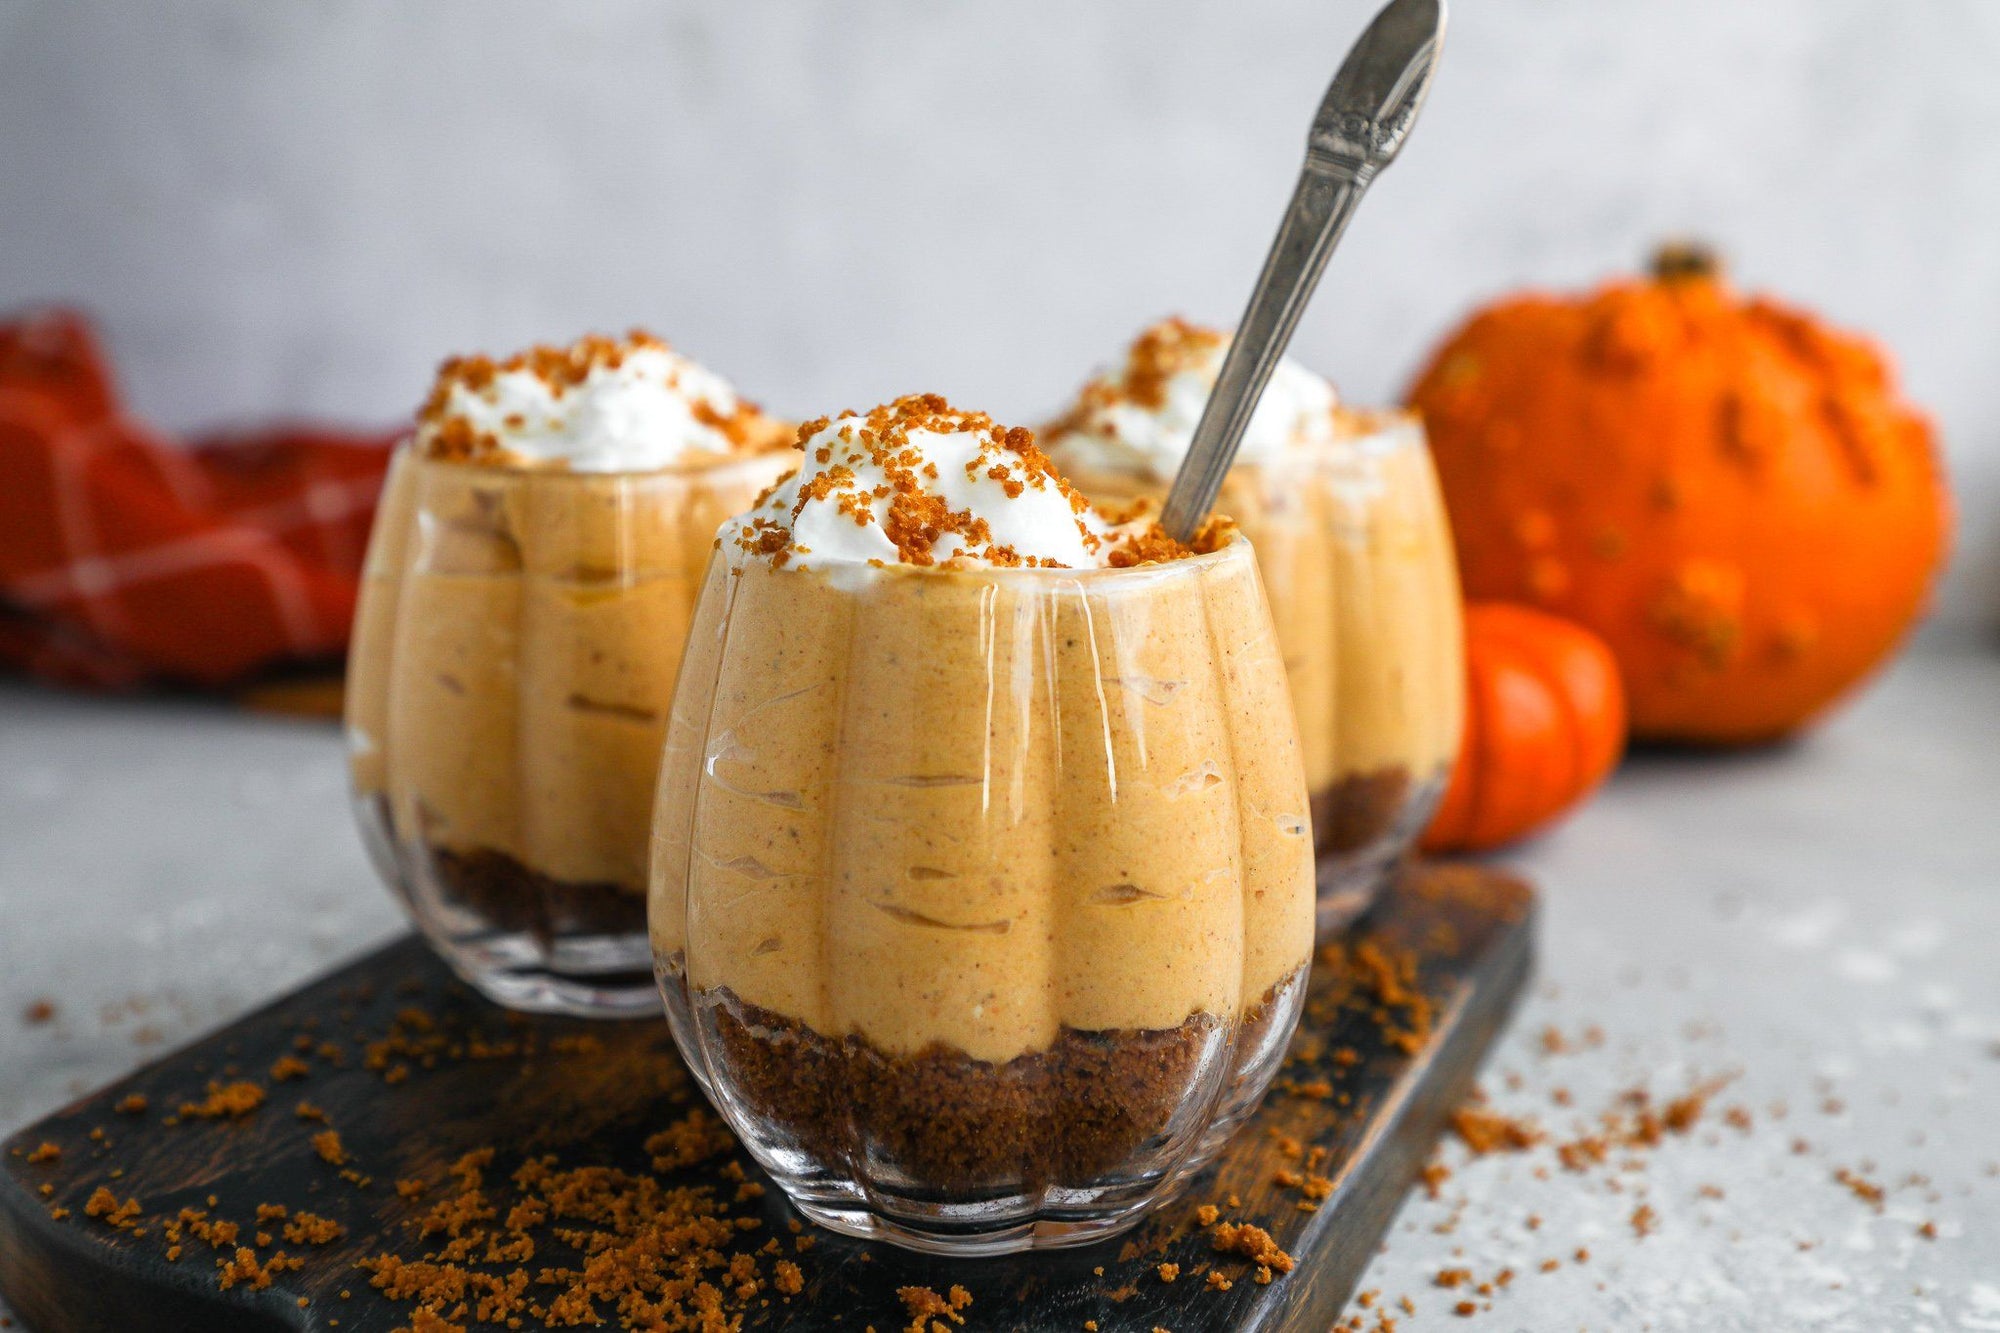 Three cups of Fody's No Bake Pumpkin Cheesecake Mousse sit on a cutting board sprinkled with decorative cinnamon. In the background behind the pumpkin cheesecake, three orange gourds decorate this image of a low FODMAP dessert.